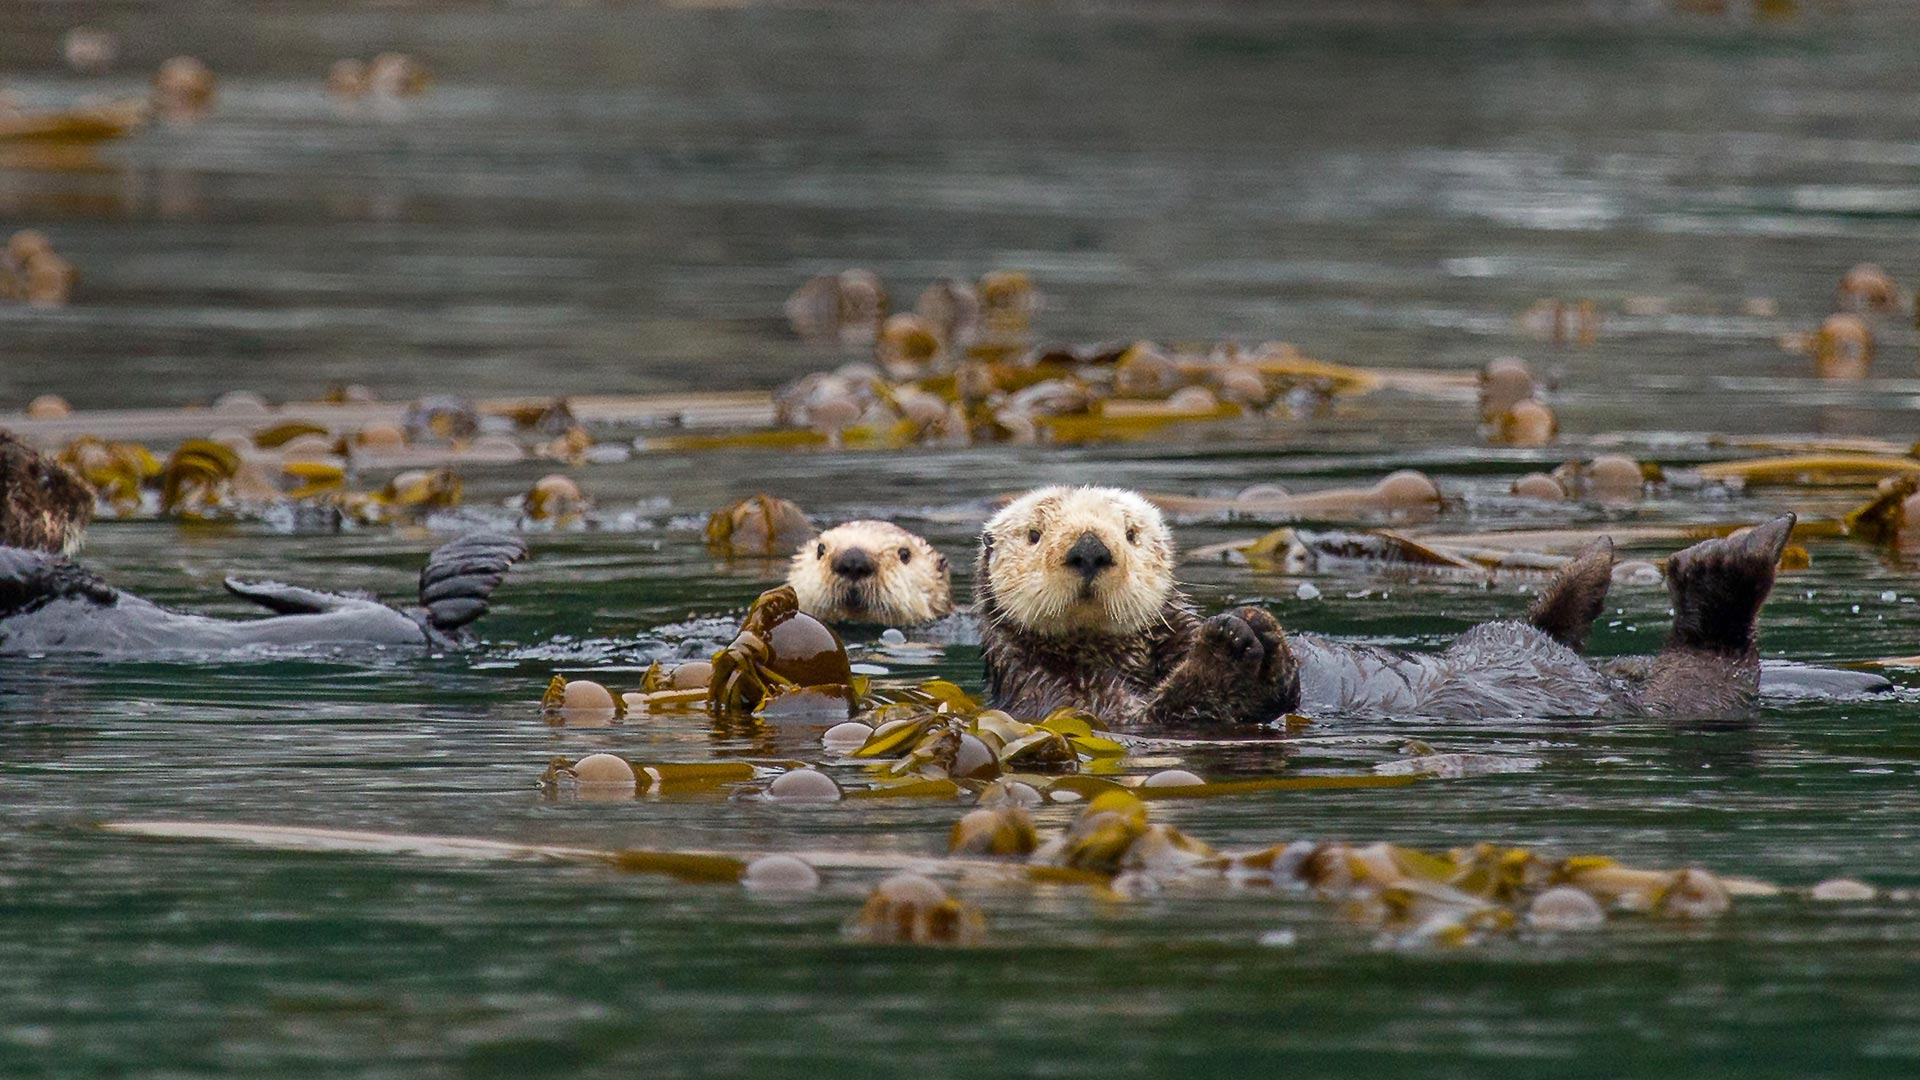 Photo of two sea otters beside kelp in the water.